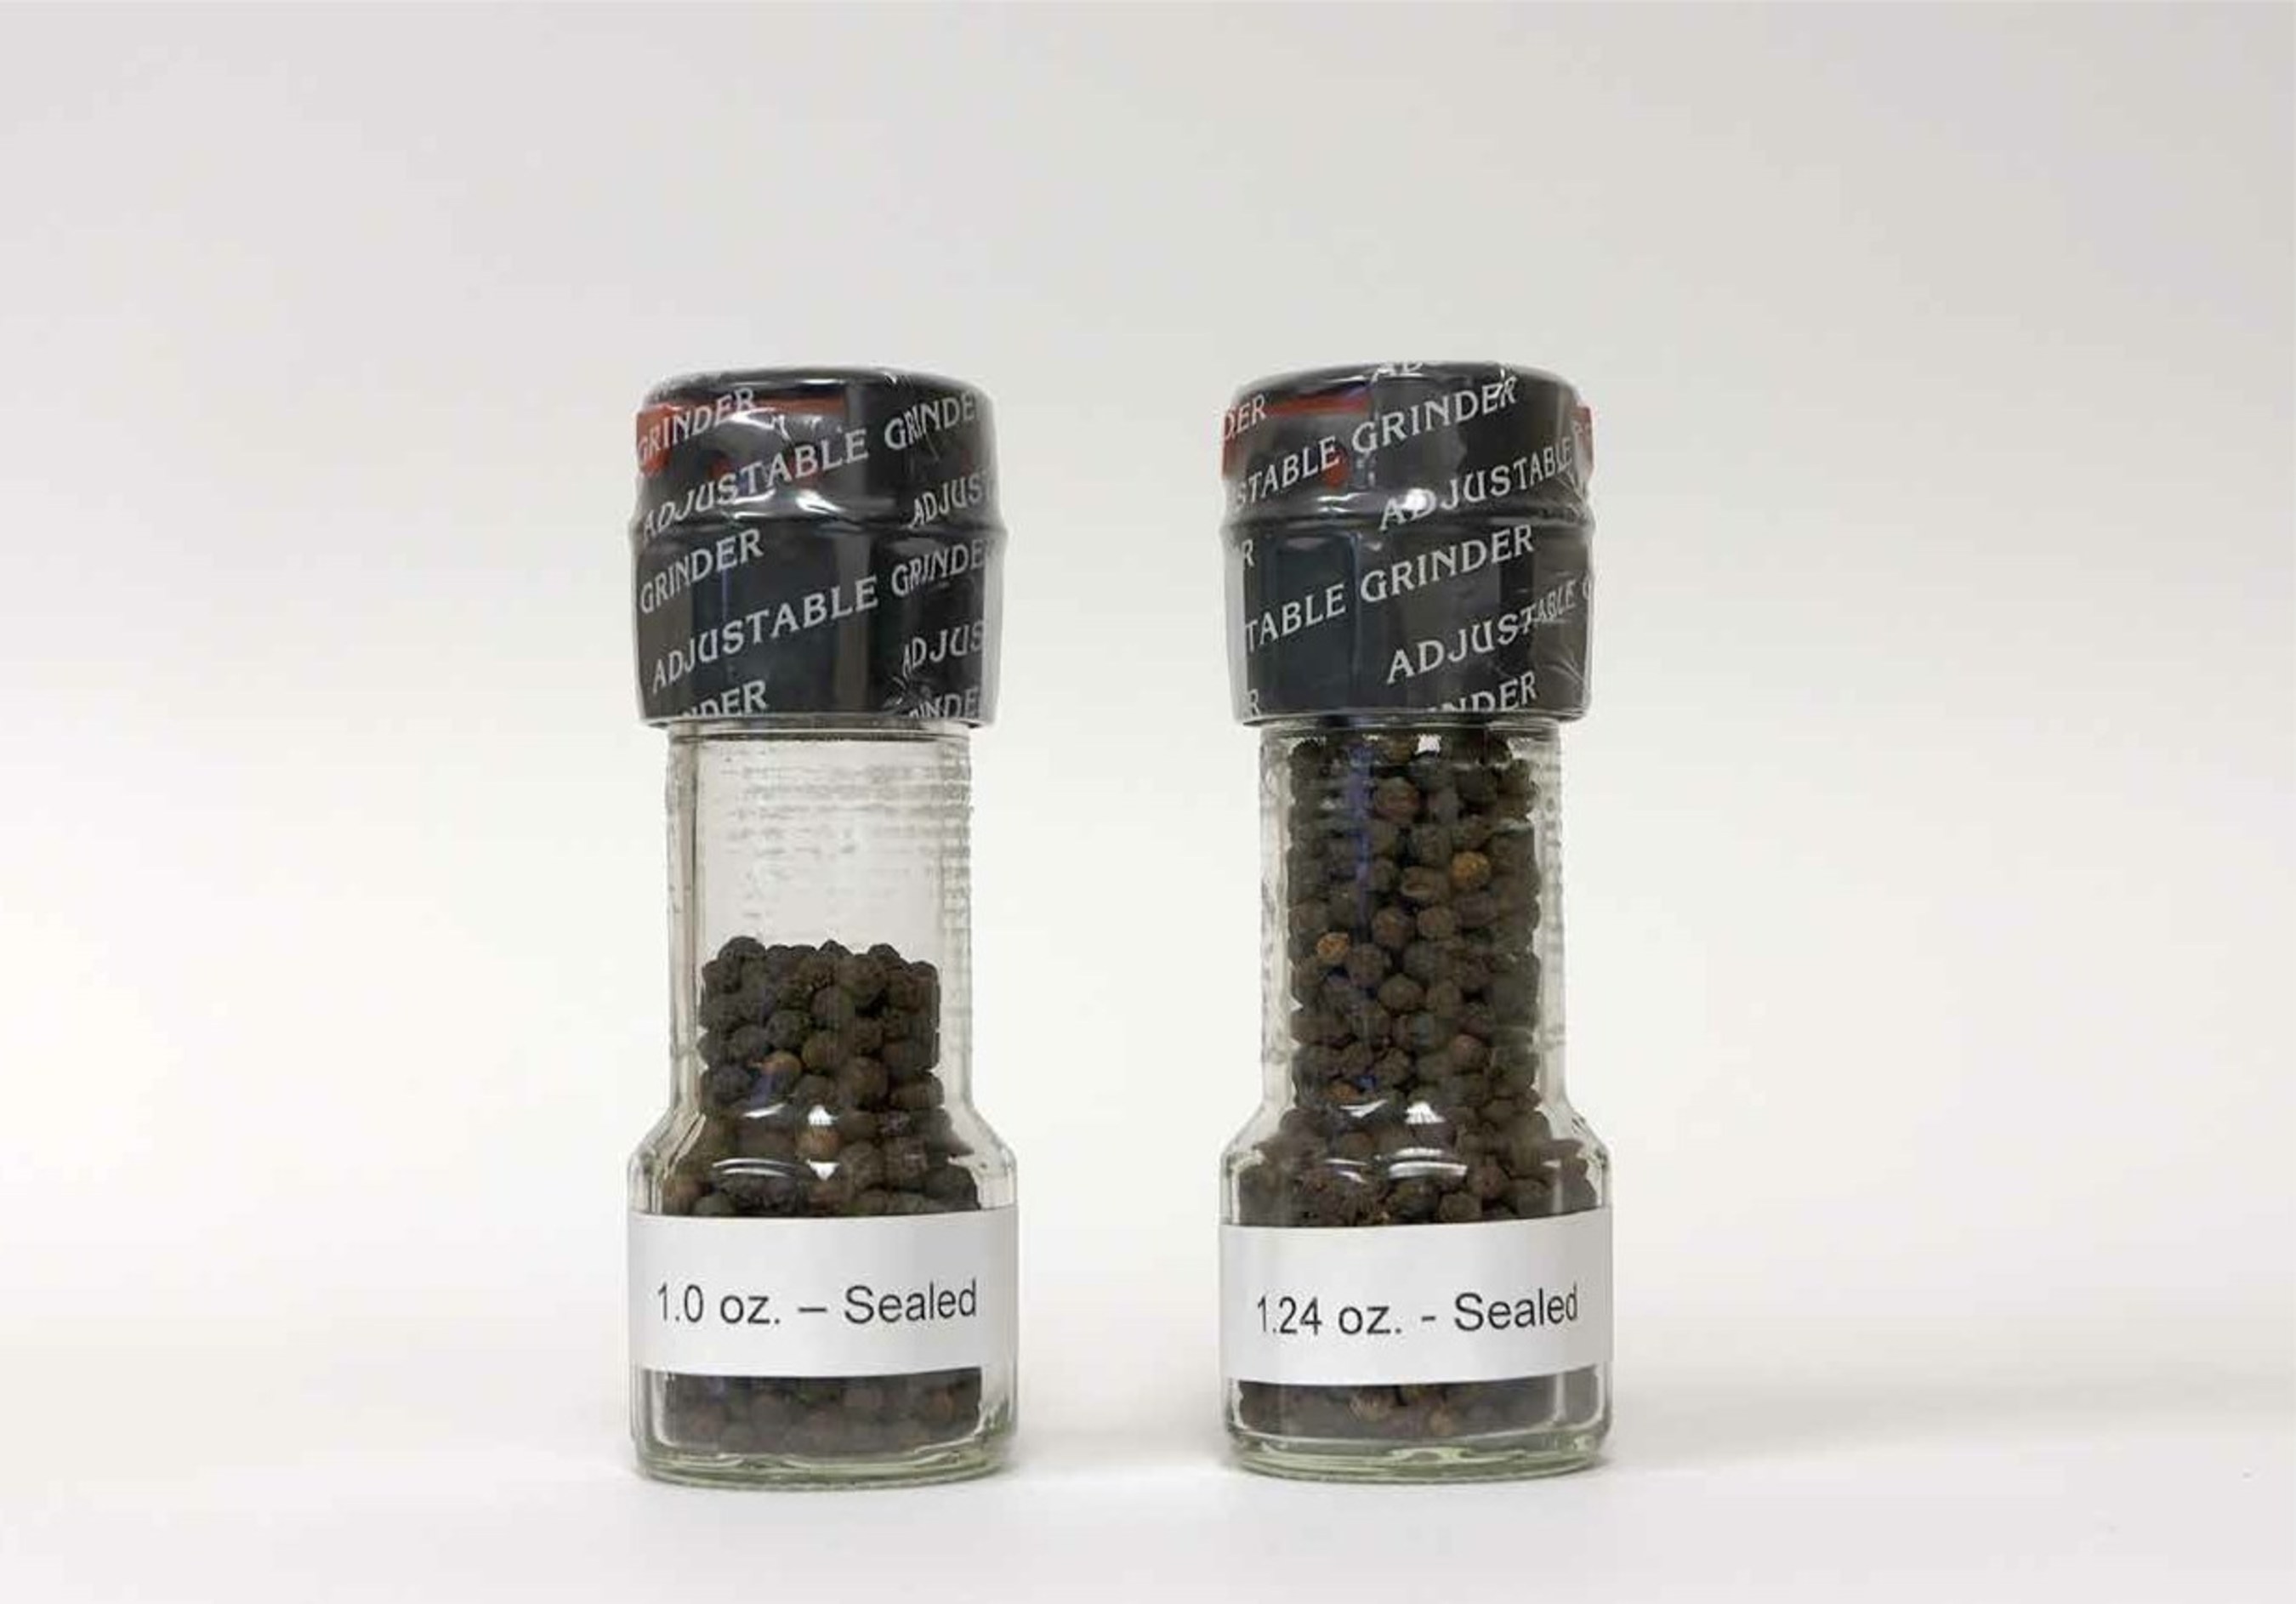 Exhibit B: Photo of the original 1.24 oz. McCormick black peppercorn grinder and the now 20% content reduced-size ("slack filled") 1 oz. McCormick black pepper grinder in sealed bottles. Only the facial label has been removed to show slack-fill.